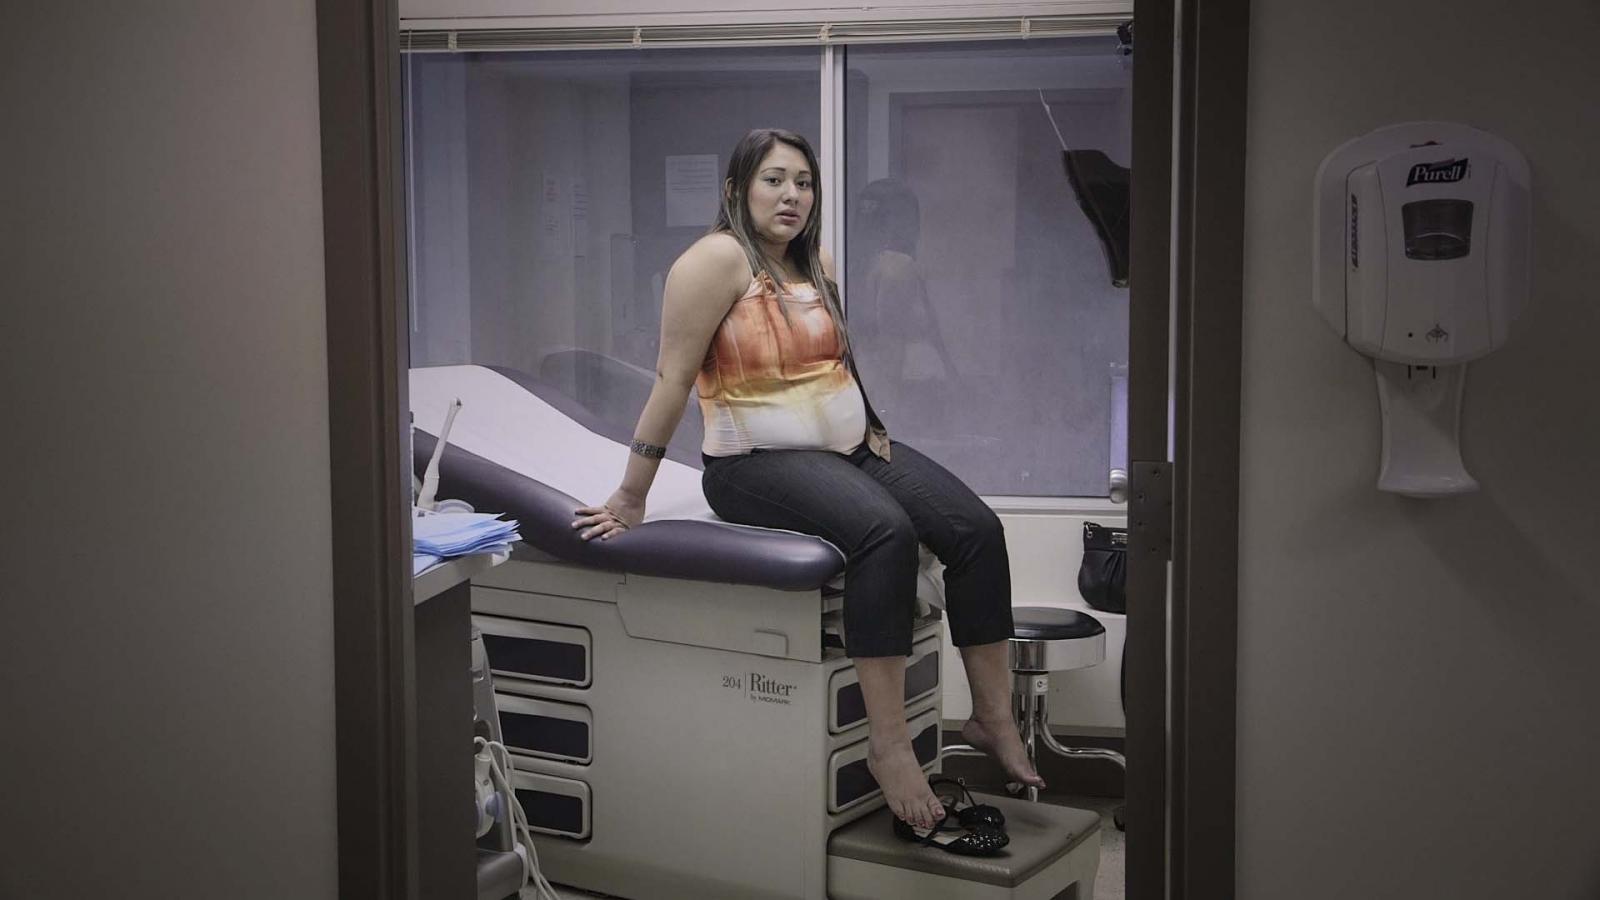 Pregnant Latina woman sits on an examination table and looks into the camera